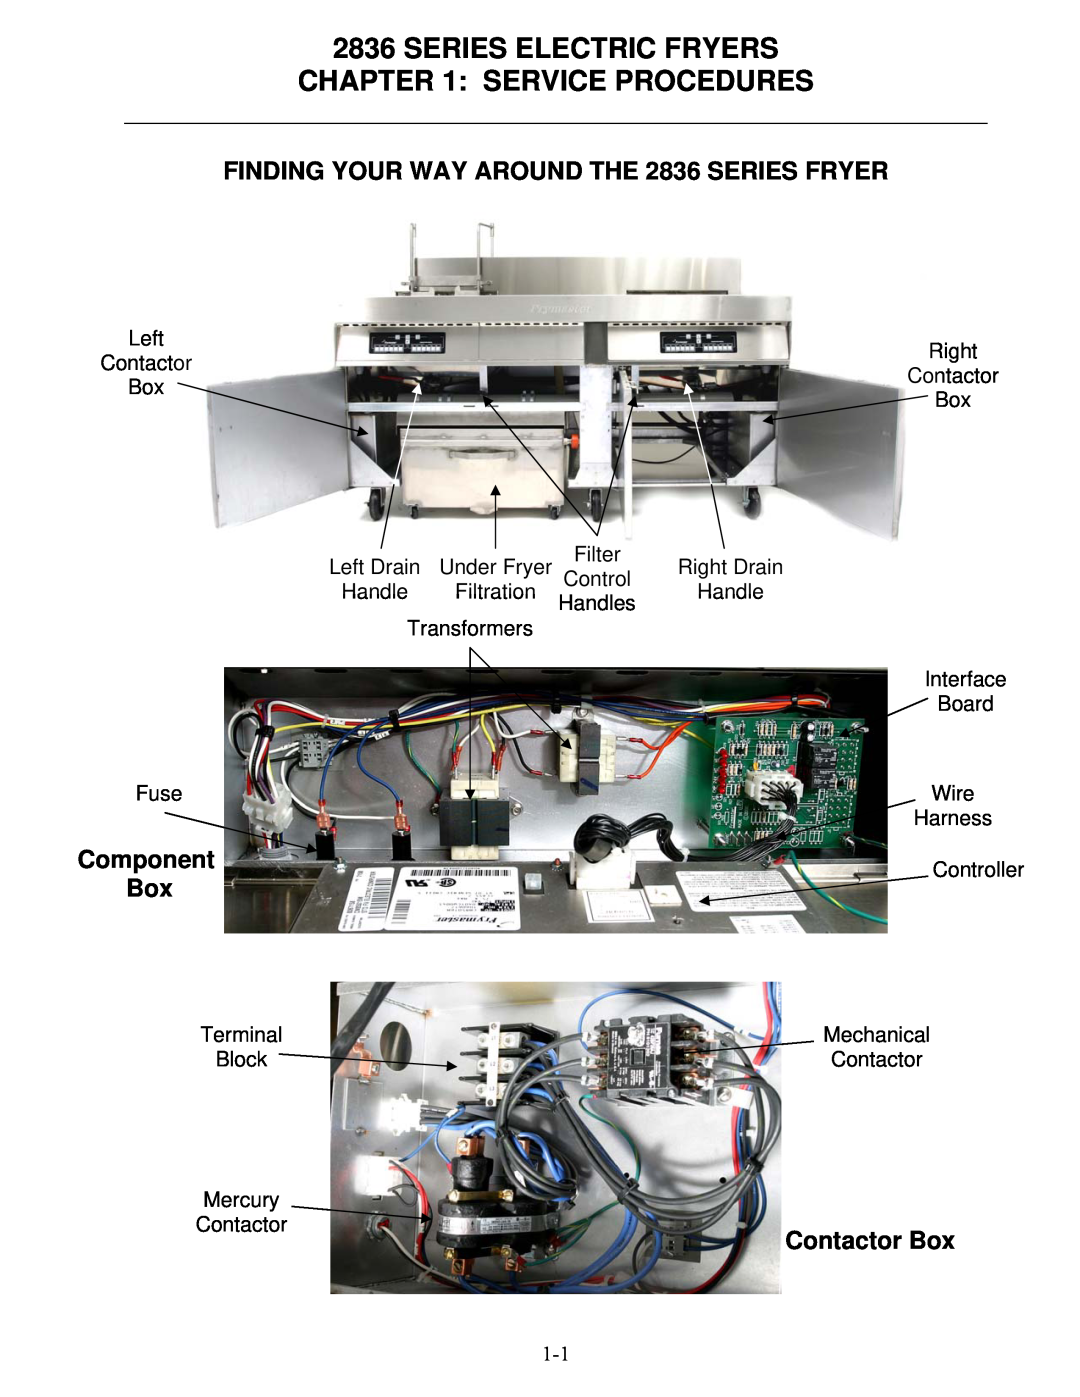 Frymaster manual Series Electric Fryers Service Procedures, FINDING YOUR WAY AROUND THE 2836 SERIES FRYER, Component Box 